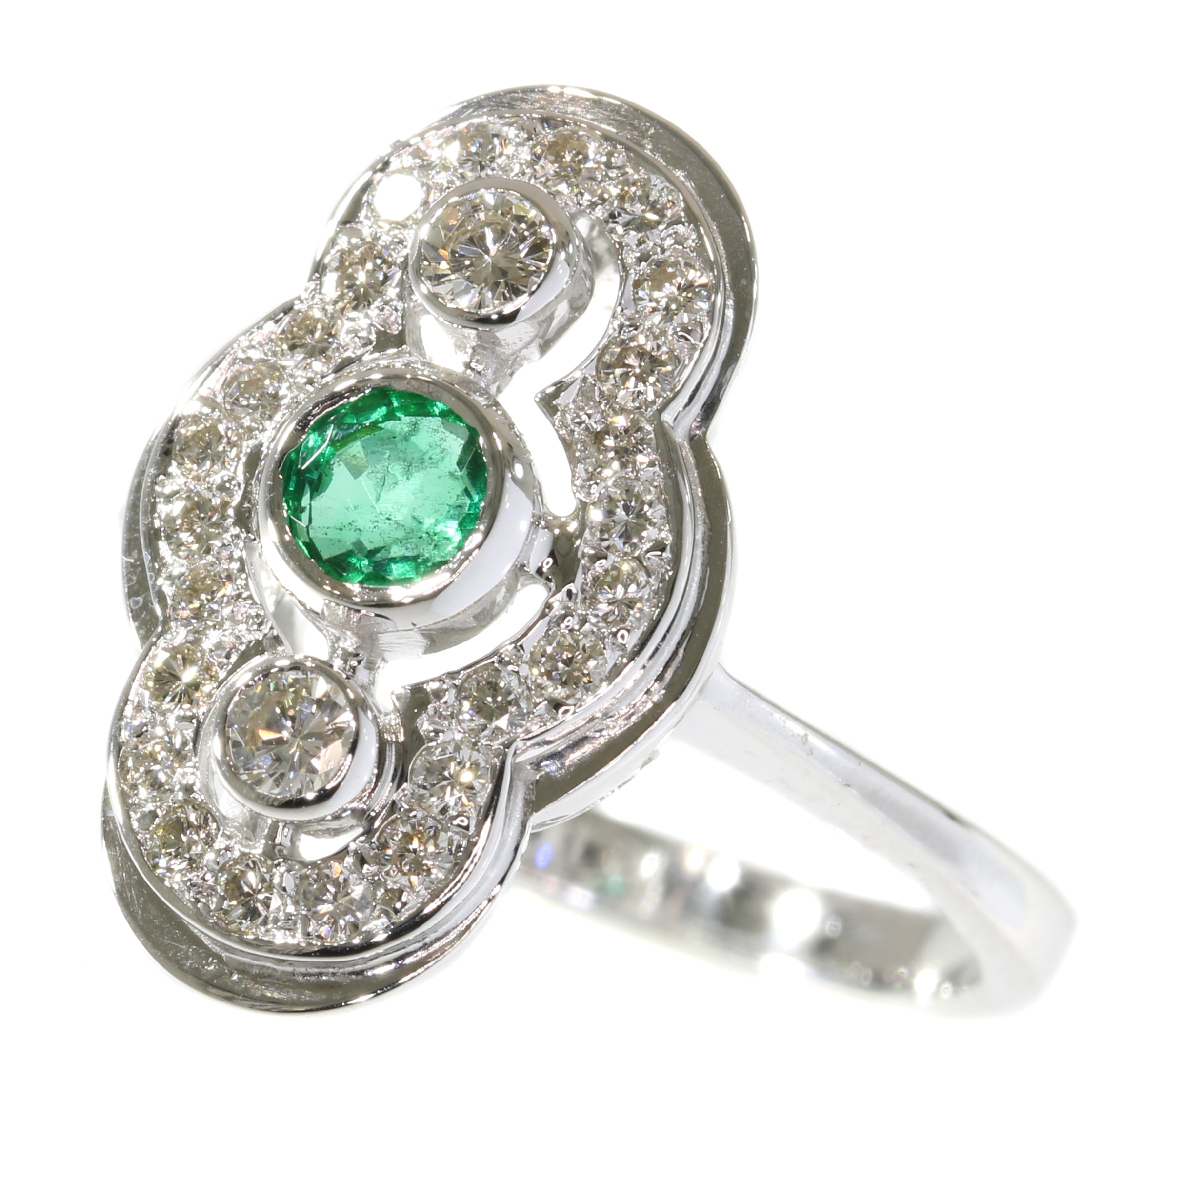 Vintage Art Deco style diamond and emerald ring made in the Seventies